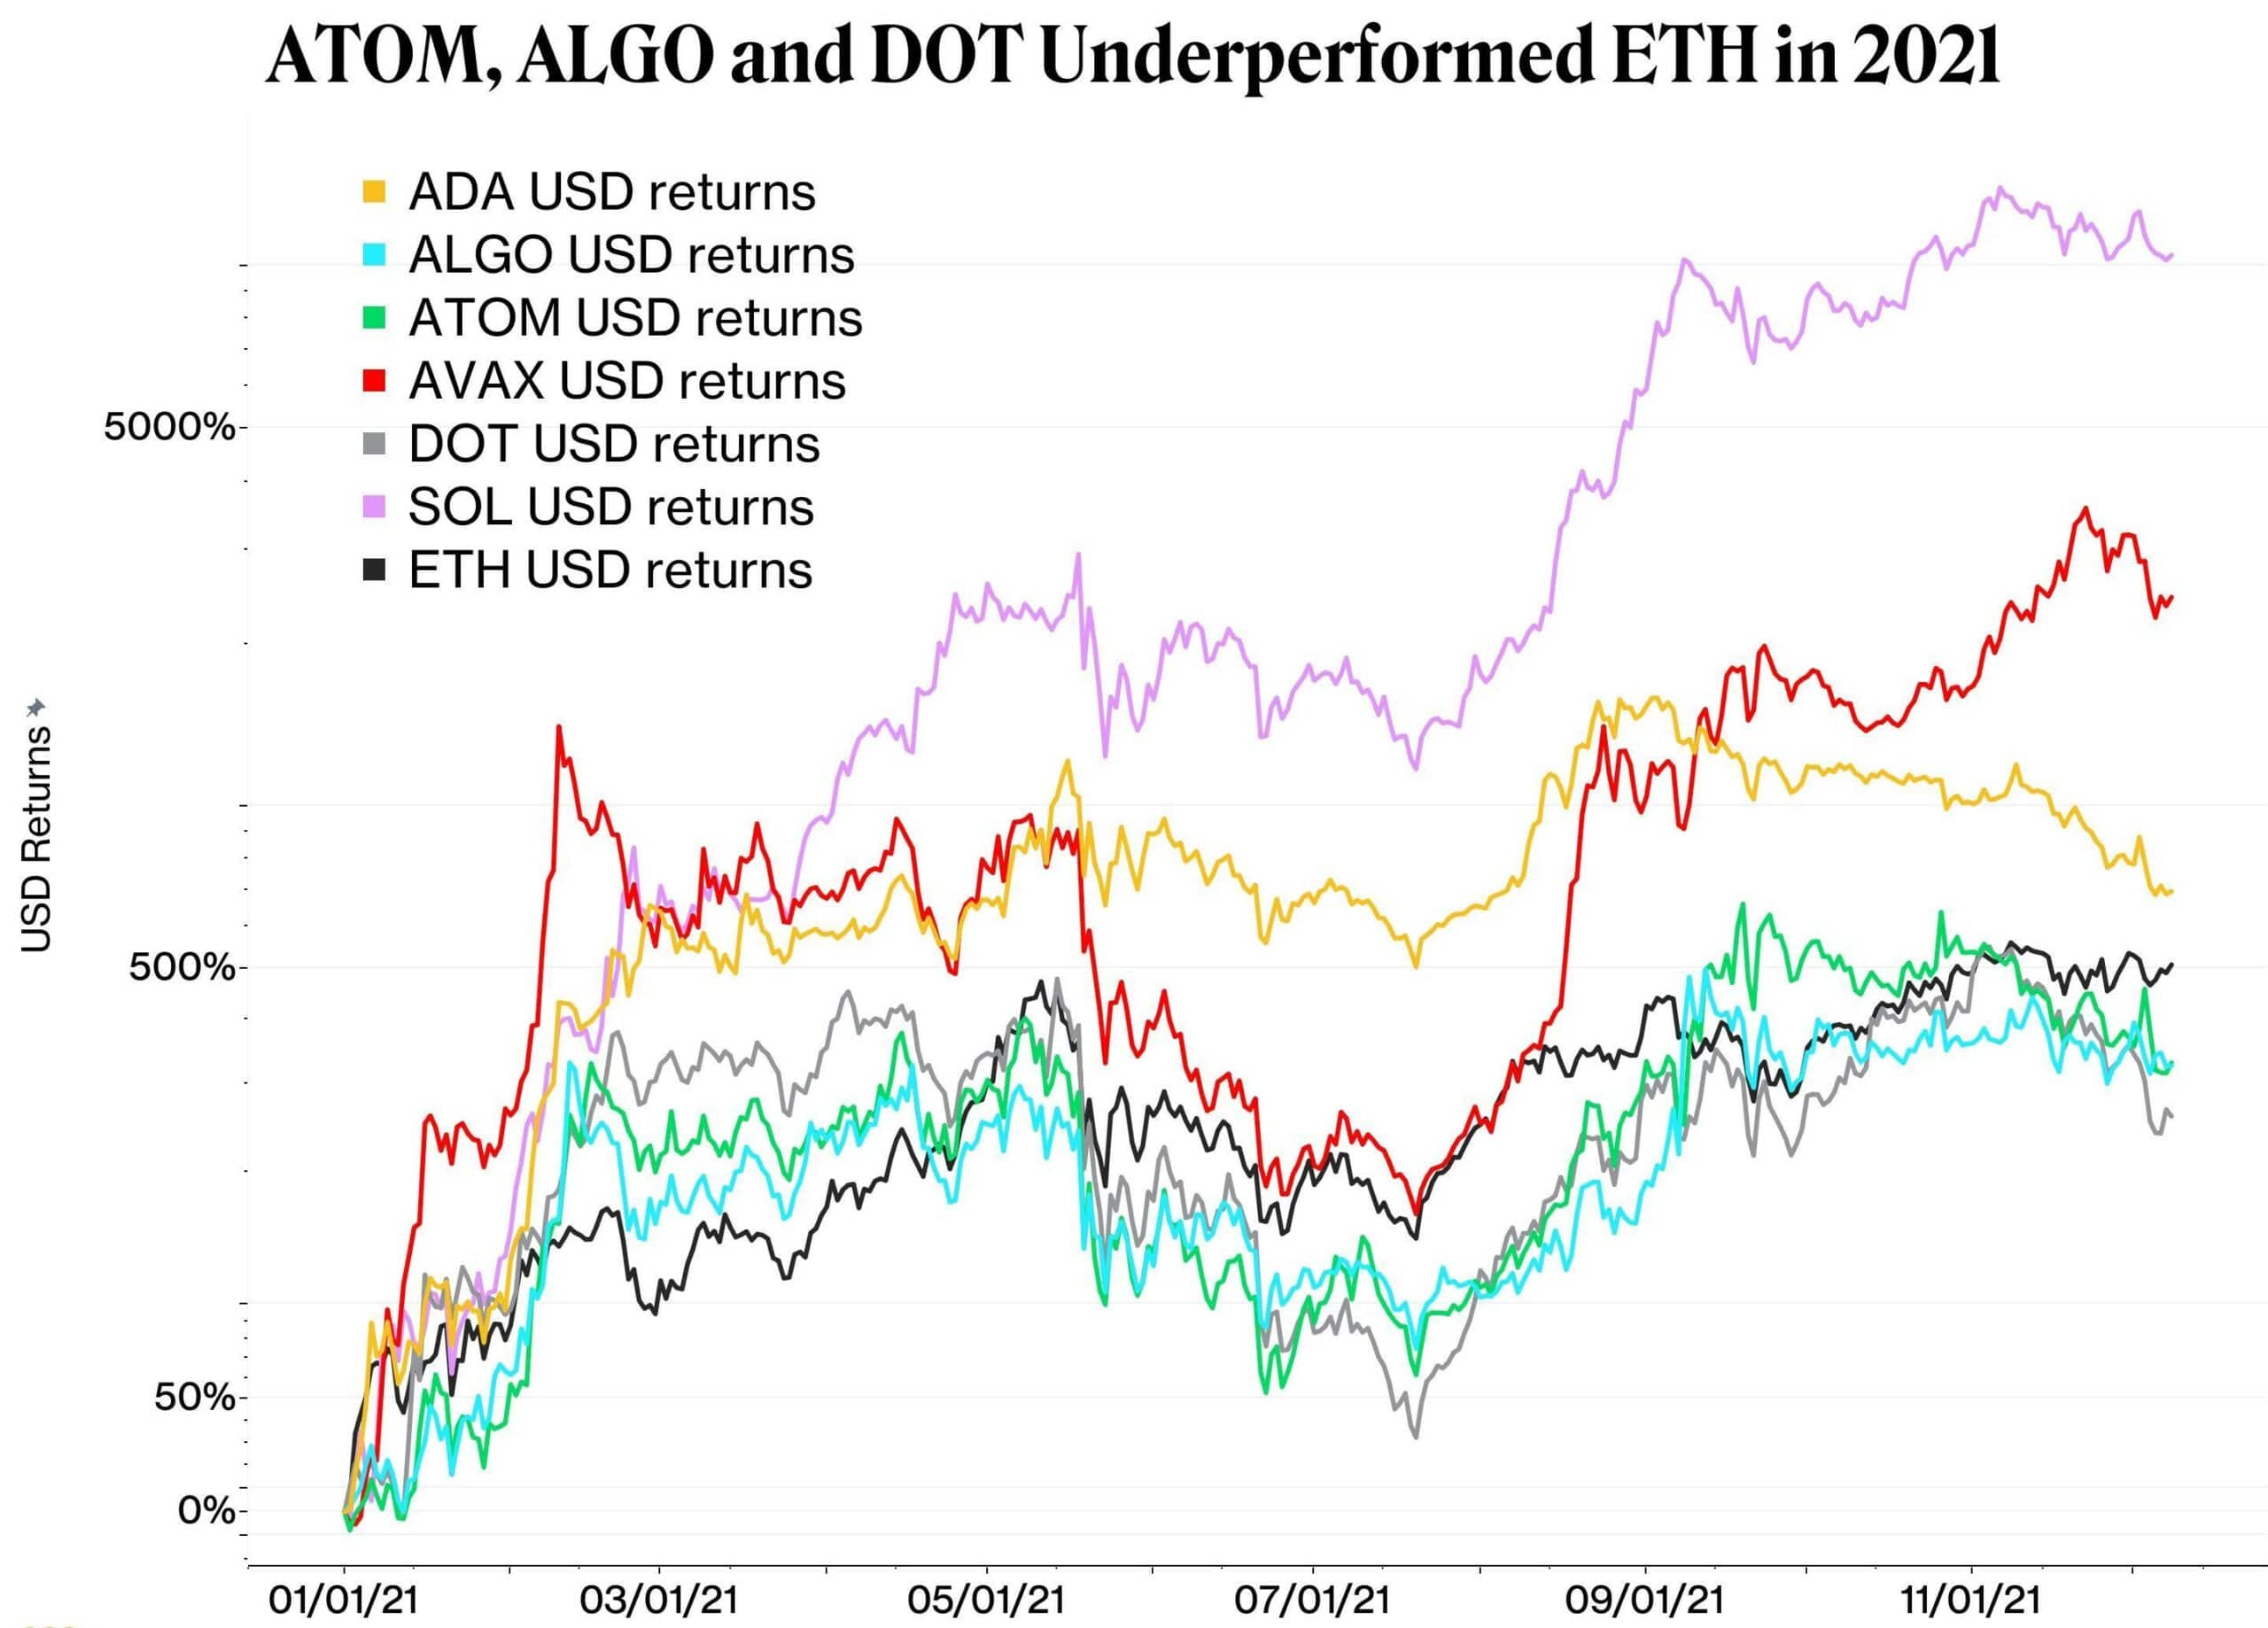 Altcoin year-to-date returns in U.S. Dollars using a logarithmic scale